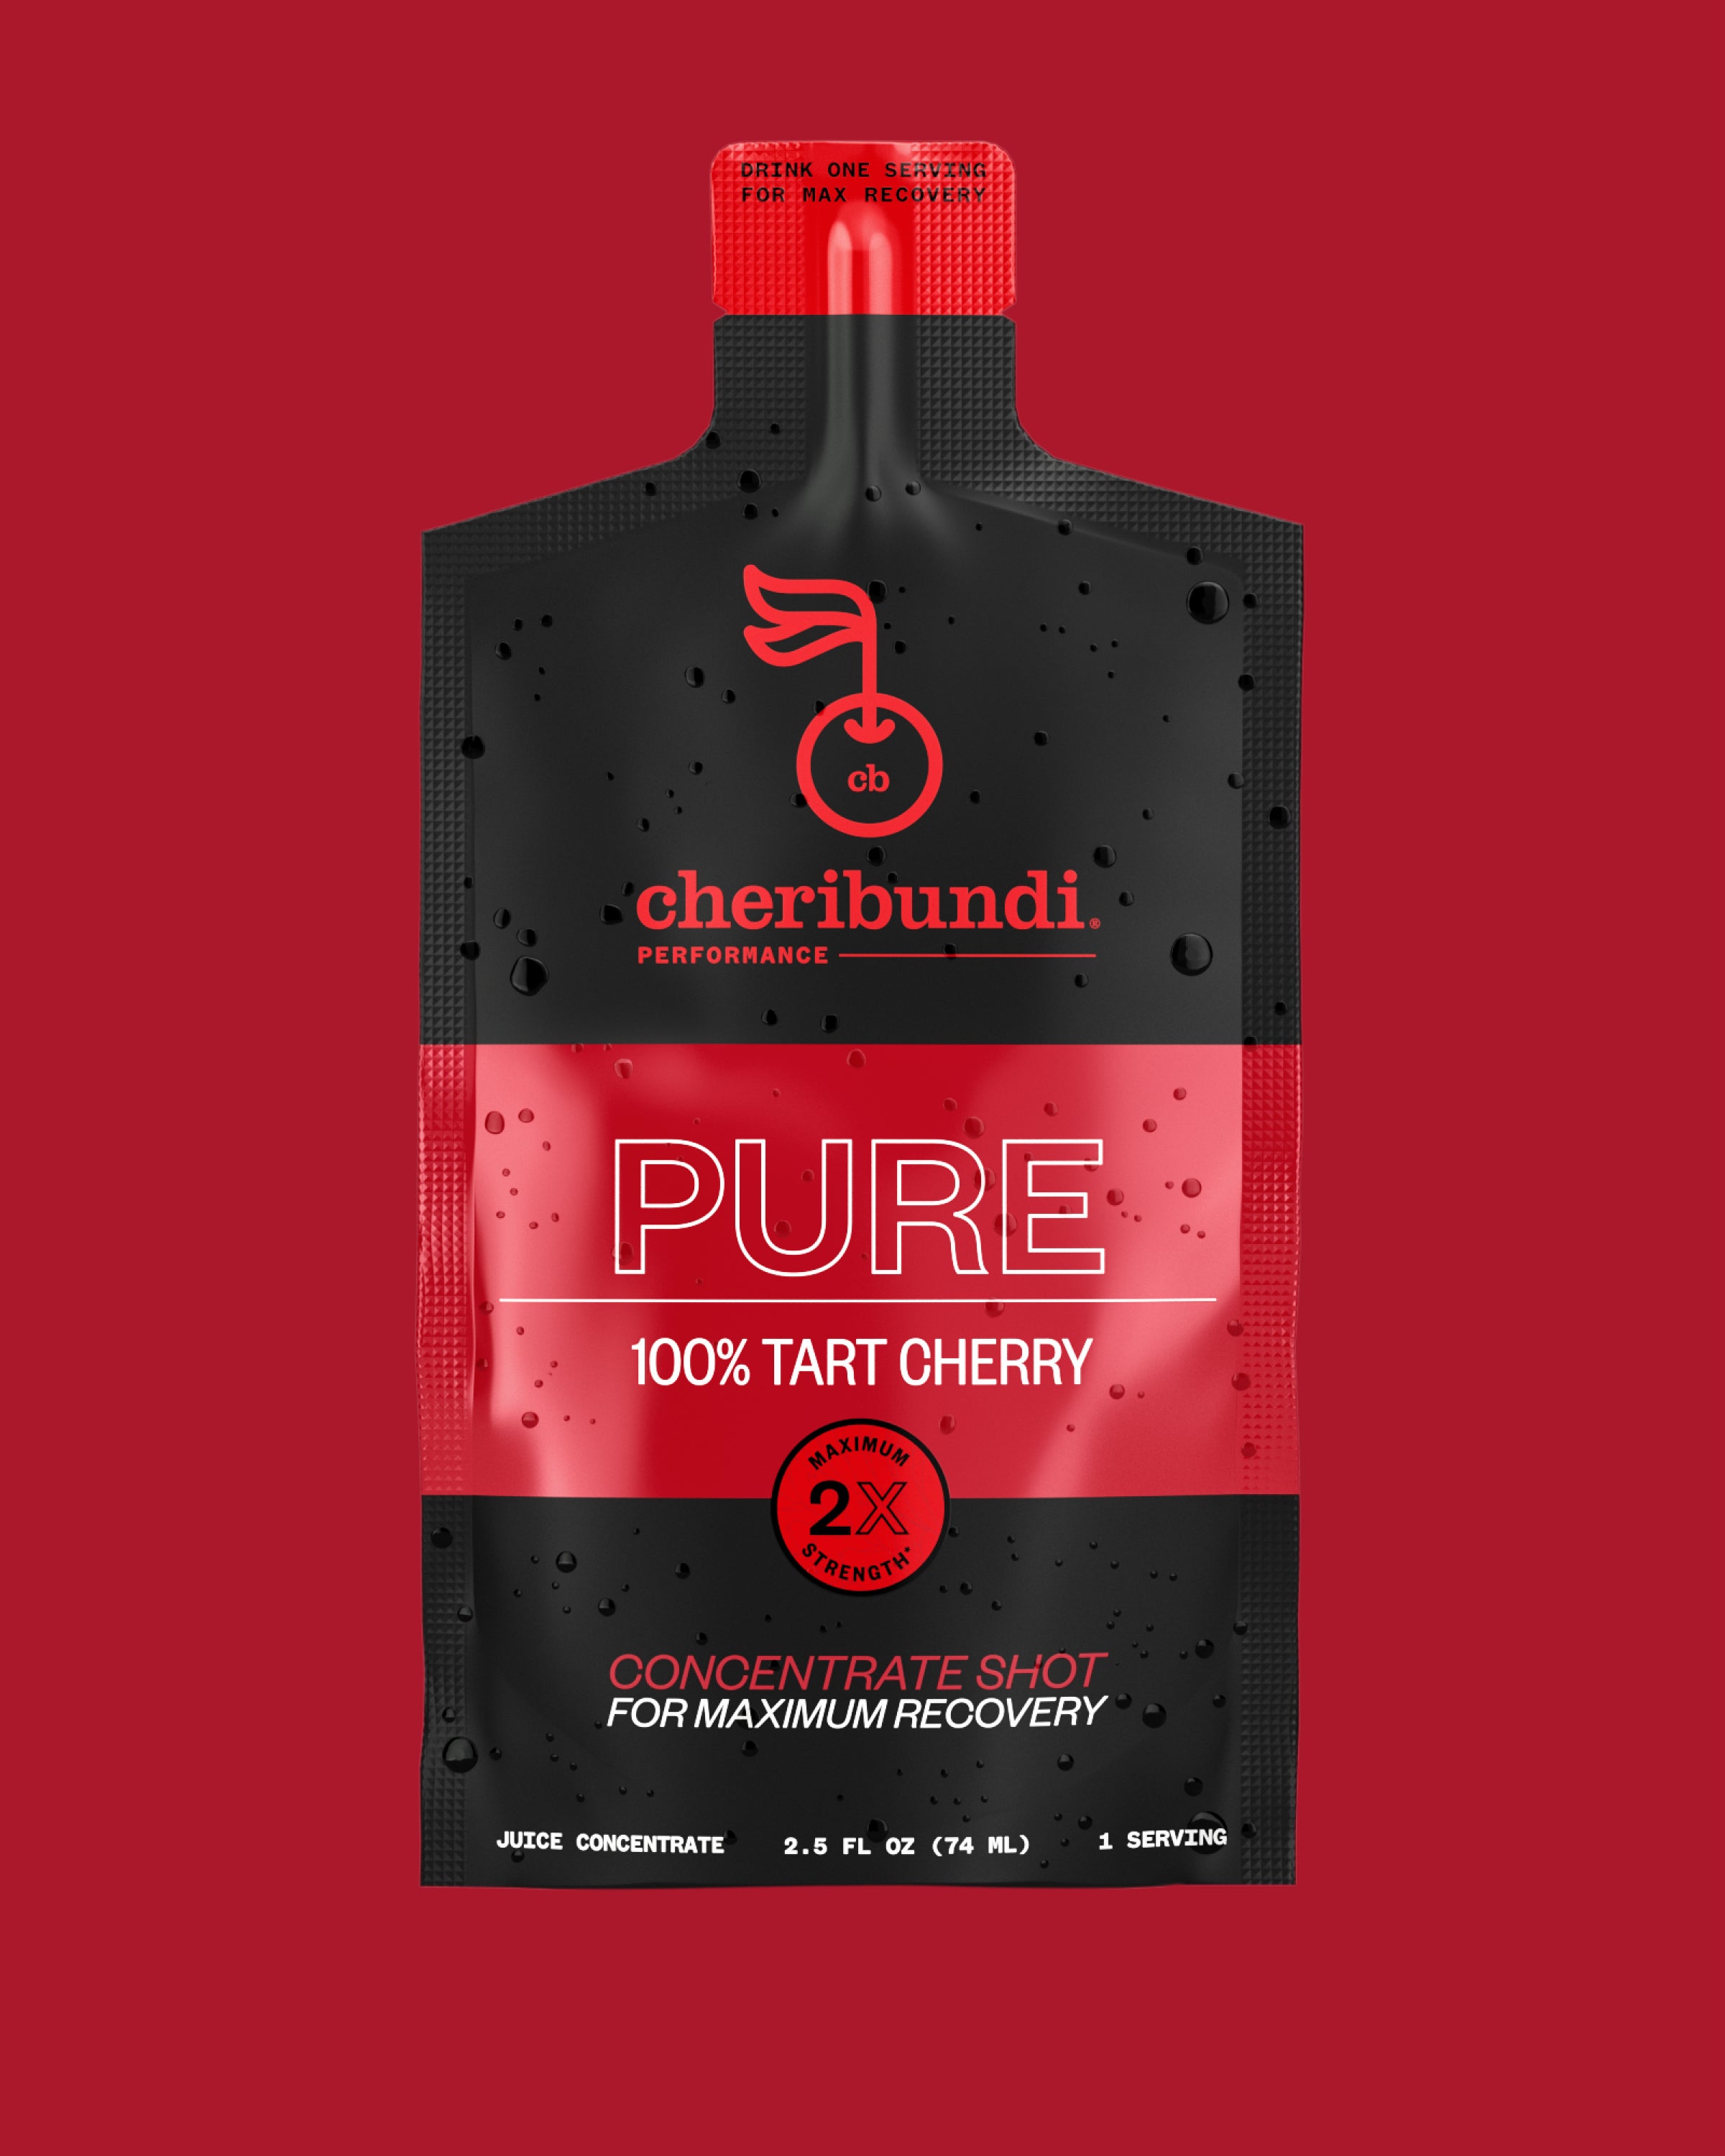 Pure Concentrate front packaging. Tart cherry juice concentrate. Cherry concentrate for gout. Cherry extract.